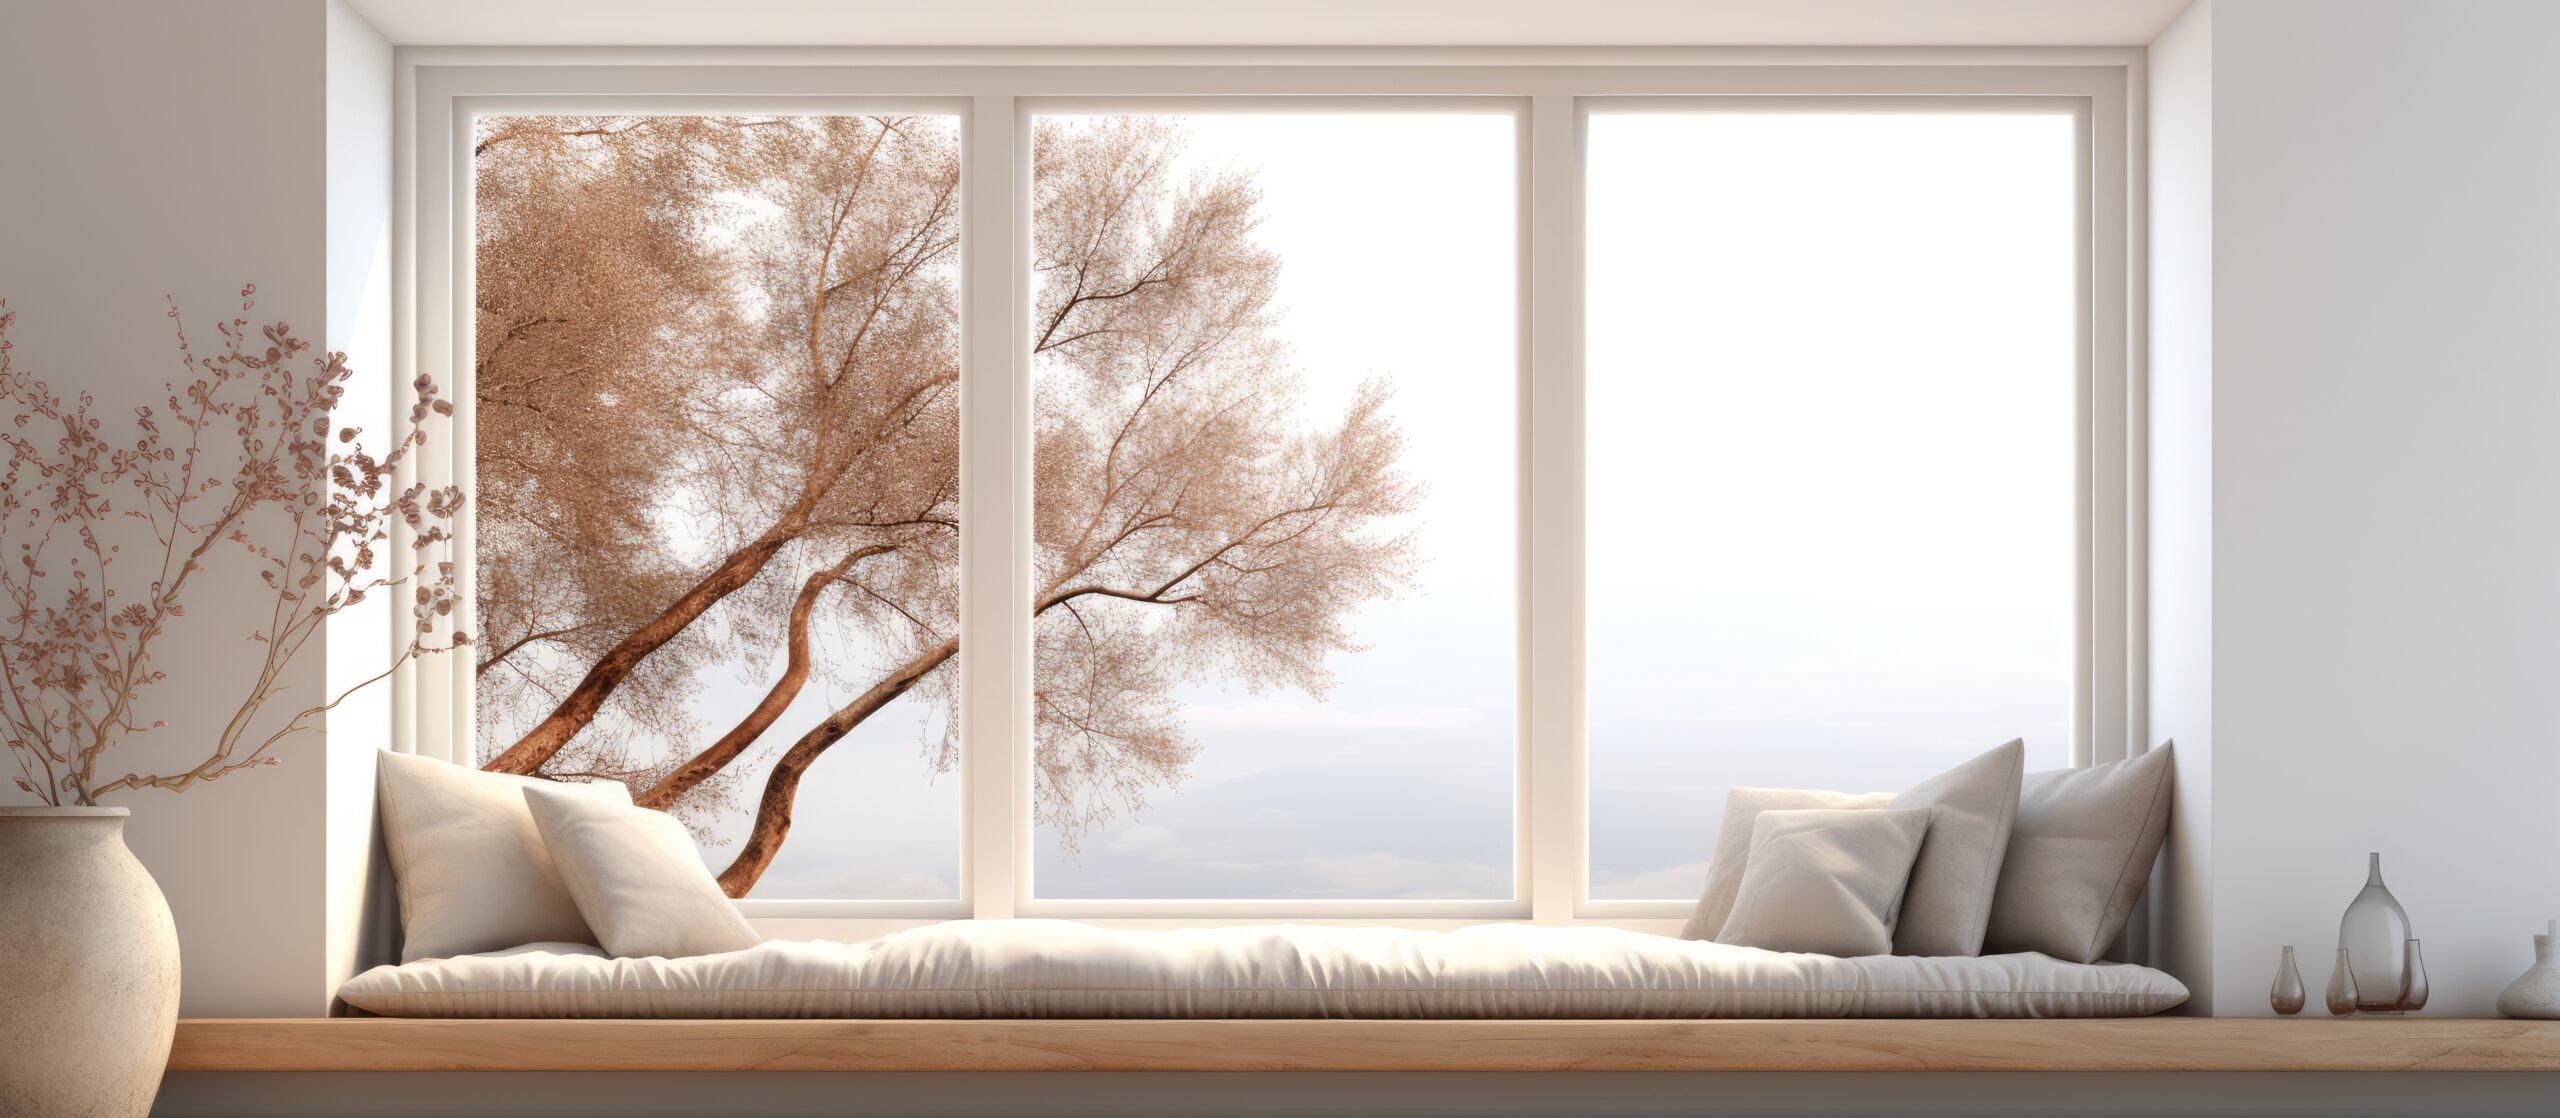 Why Install Energy Efficient Windows?